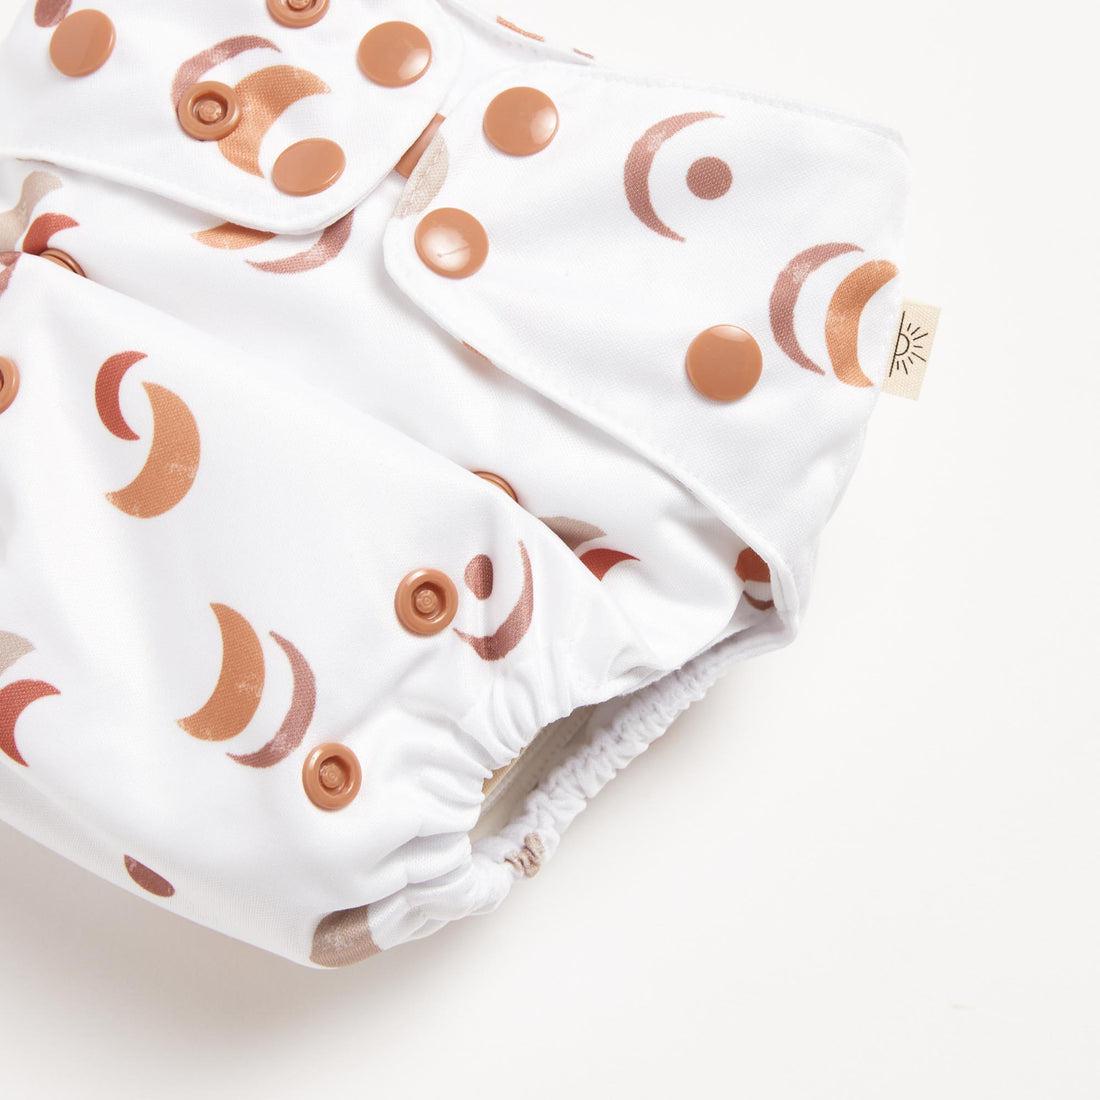 EcoNaps Snap in Pocket Nappy-Snap in with Pocket-EcoNaps-Desset Cactus-The Nappy Market